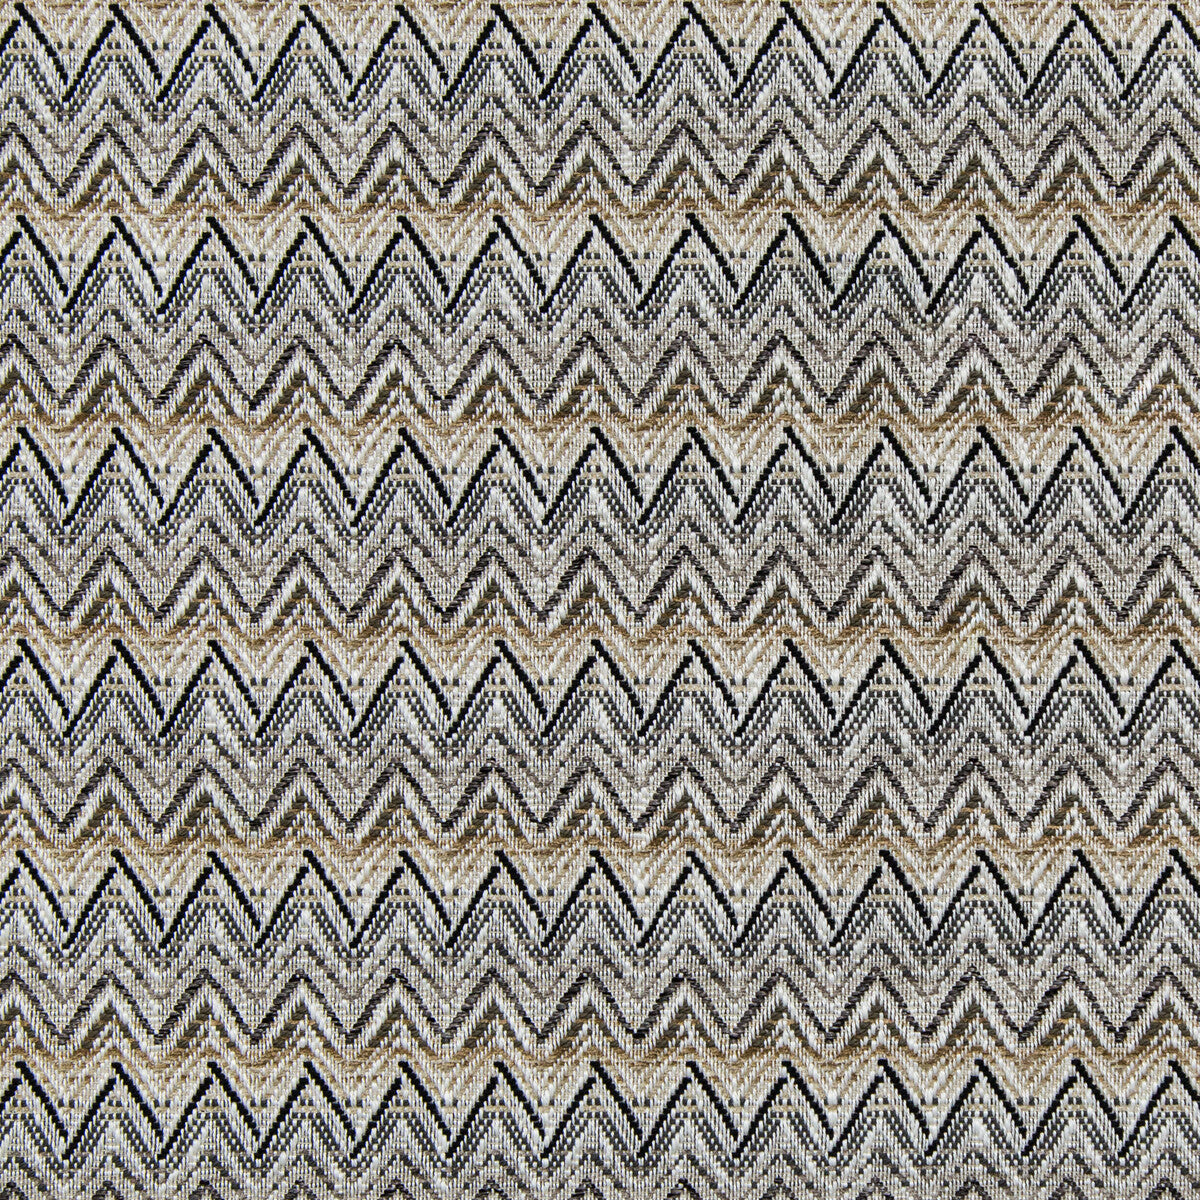 Cambrose Weave fabric in stone color - pattern 2014192.168.0 - by Lee Jofa in the Mabley Handler collection